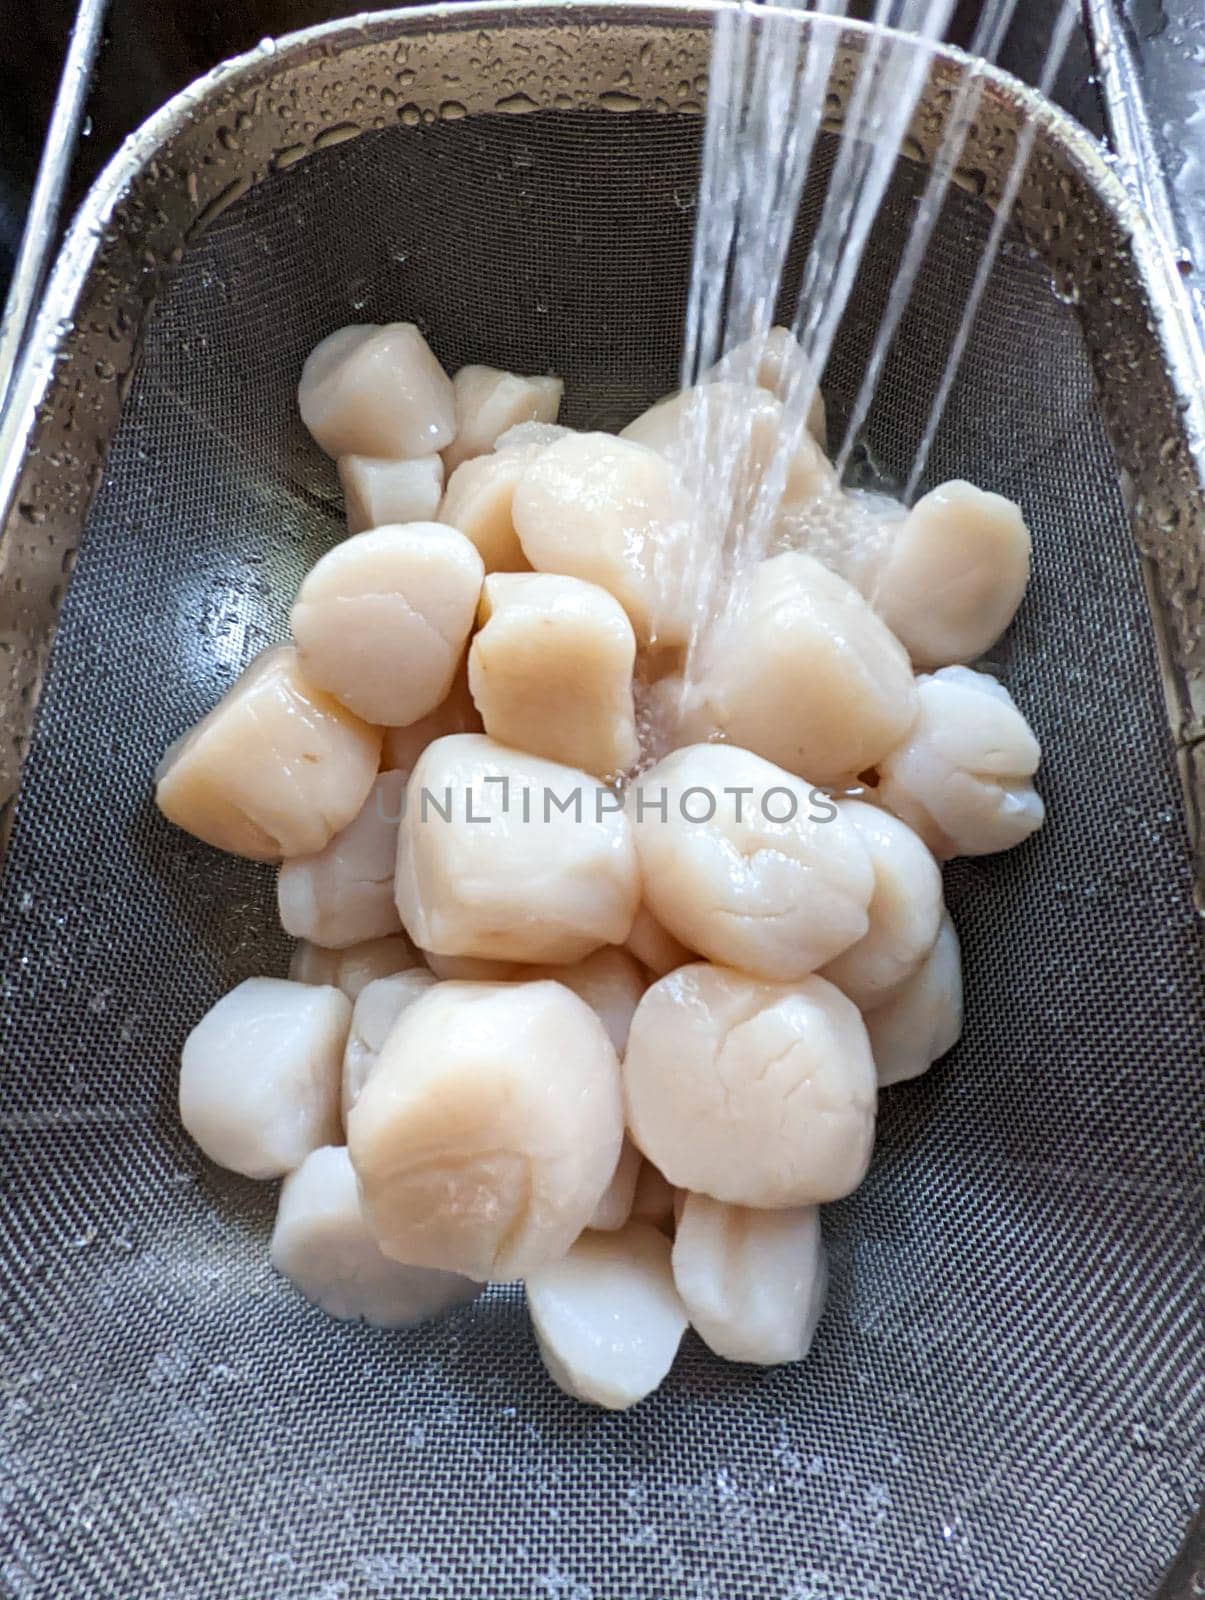 raw scallops prepared for party by digidreamgrafix